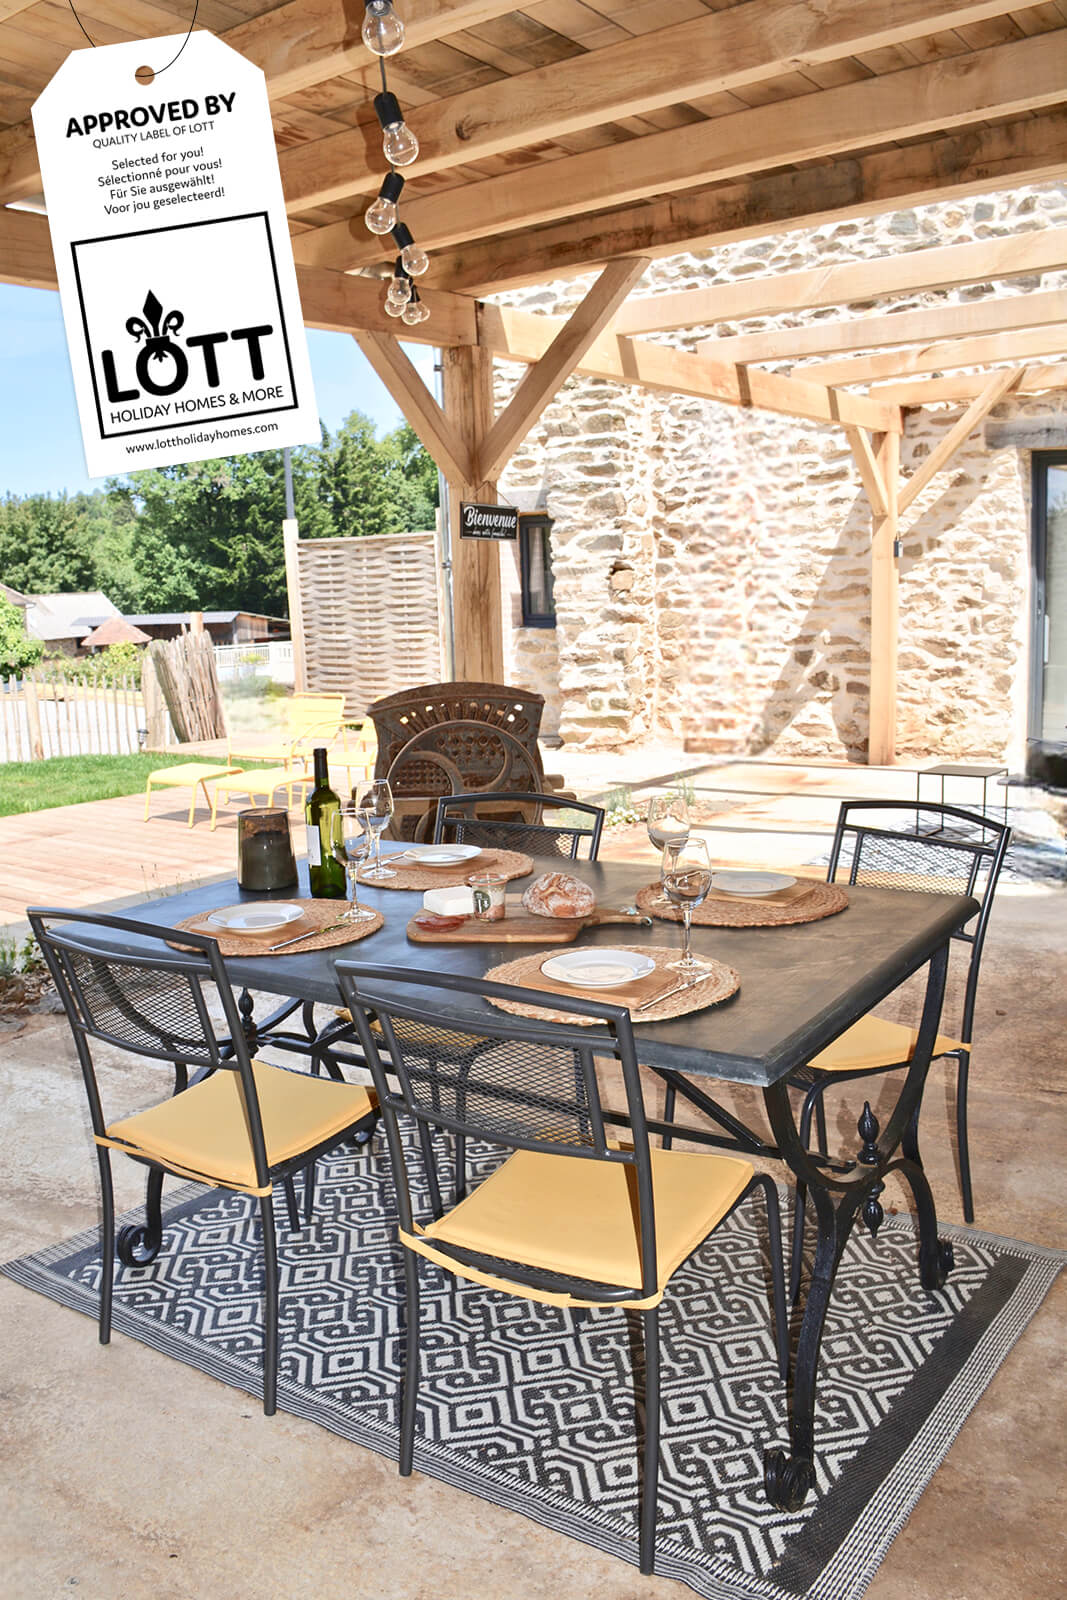 Terrace Holiday home LOTT Saint Germain les Belles robust wooden veranda approved by LOTT quality label